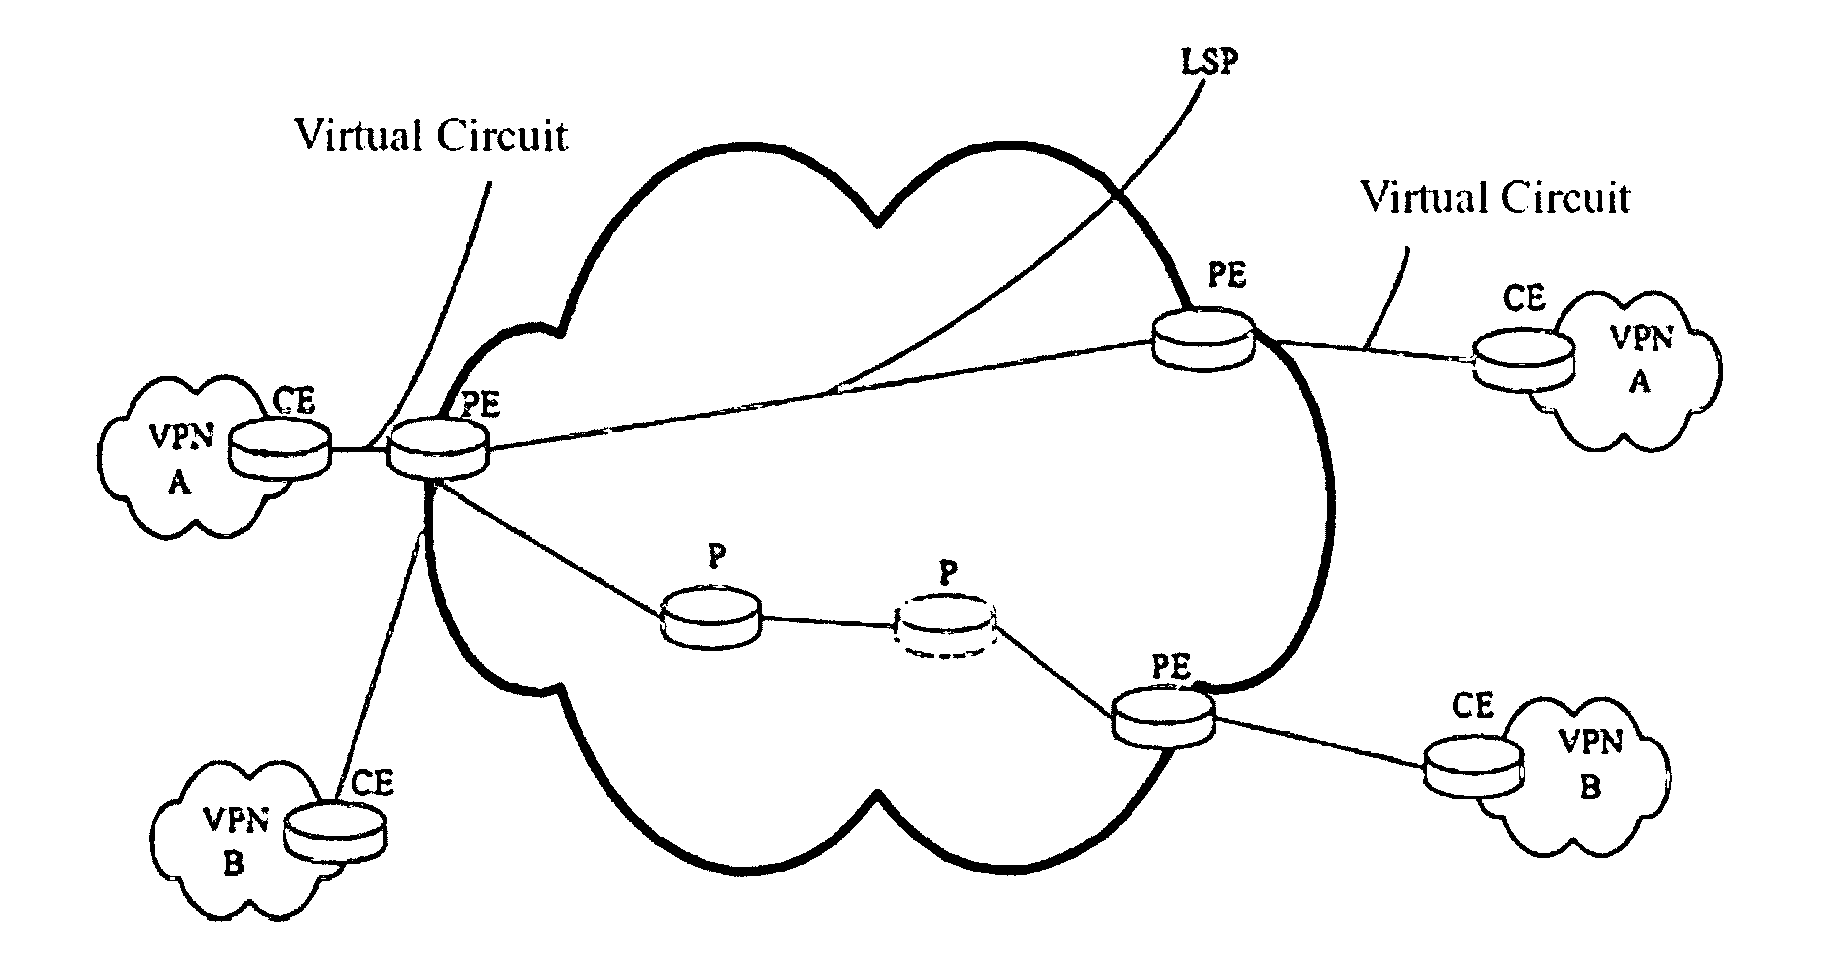 Method for implementing a virtual leased line